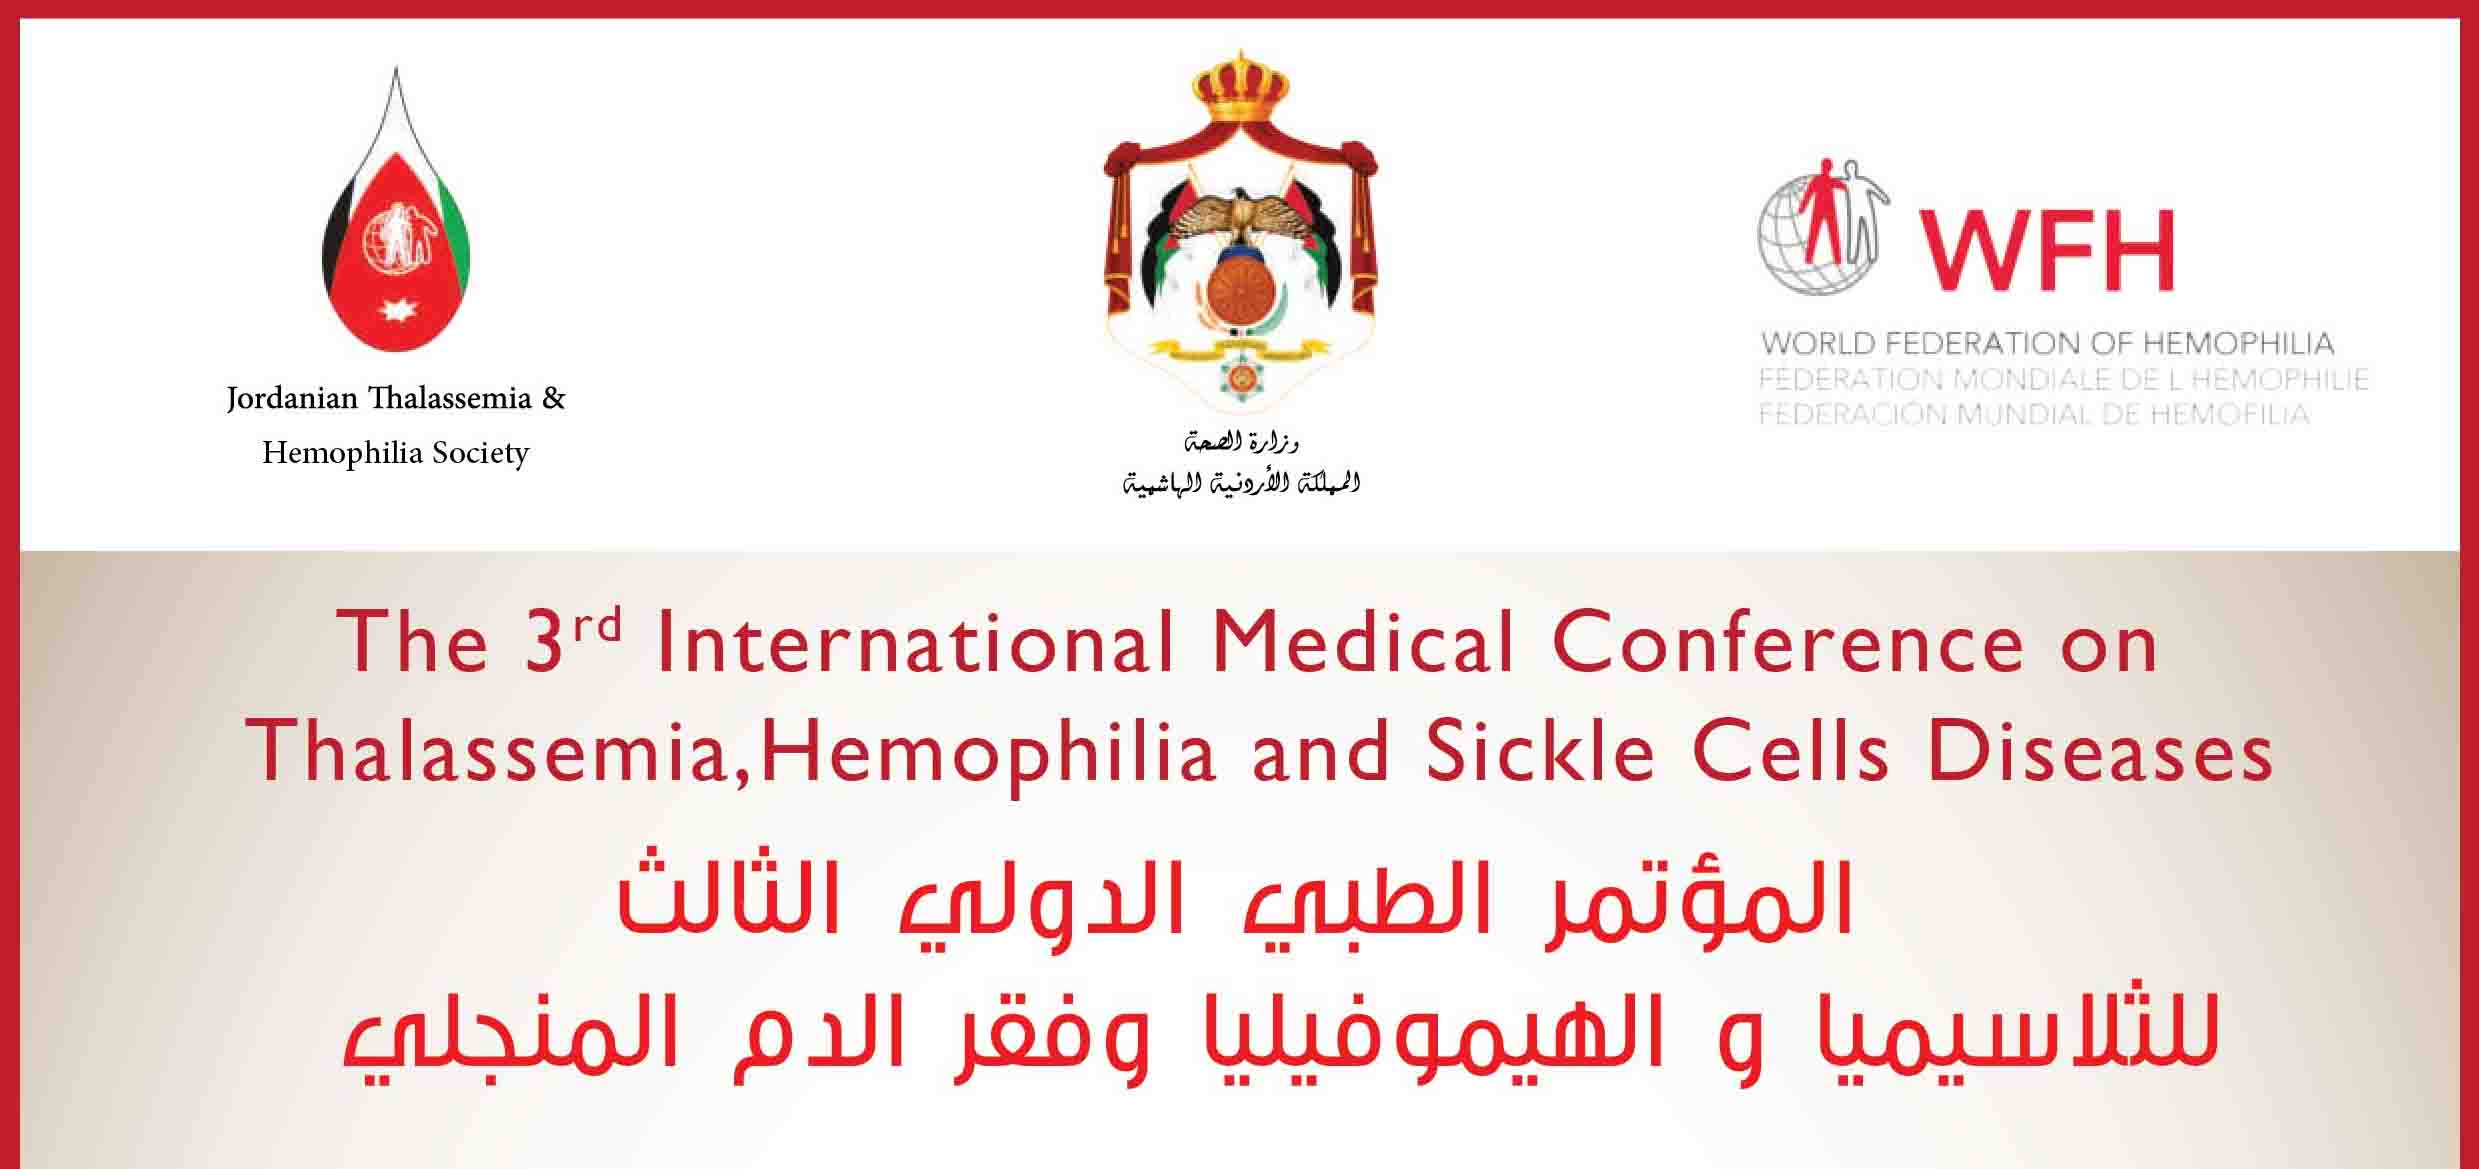 The 3rd International Medical Conference on Thalassemia, Hemophilia, and Sickle Cells Diseases (Hybrid)”